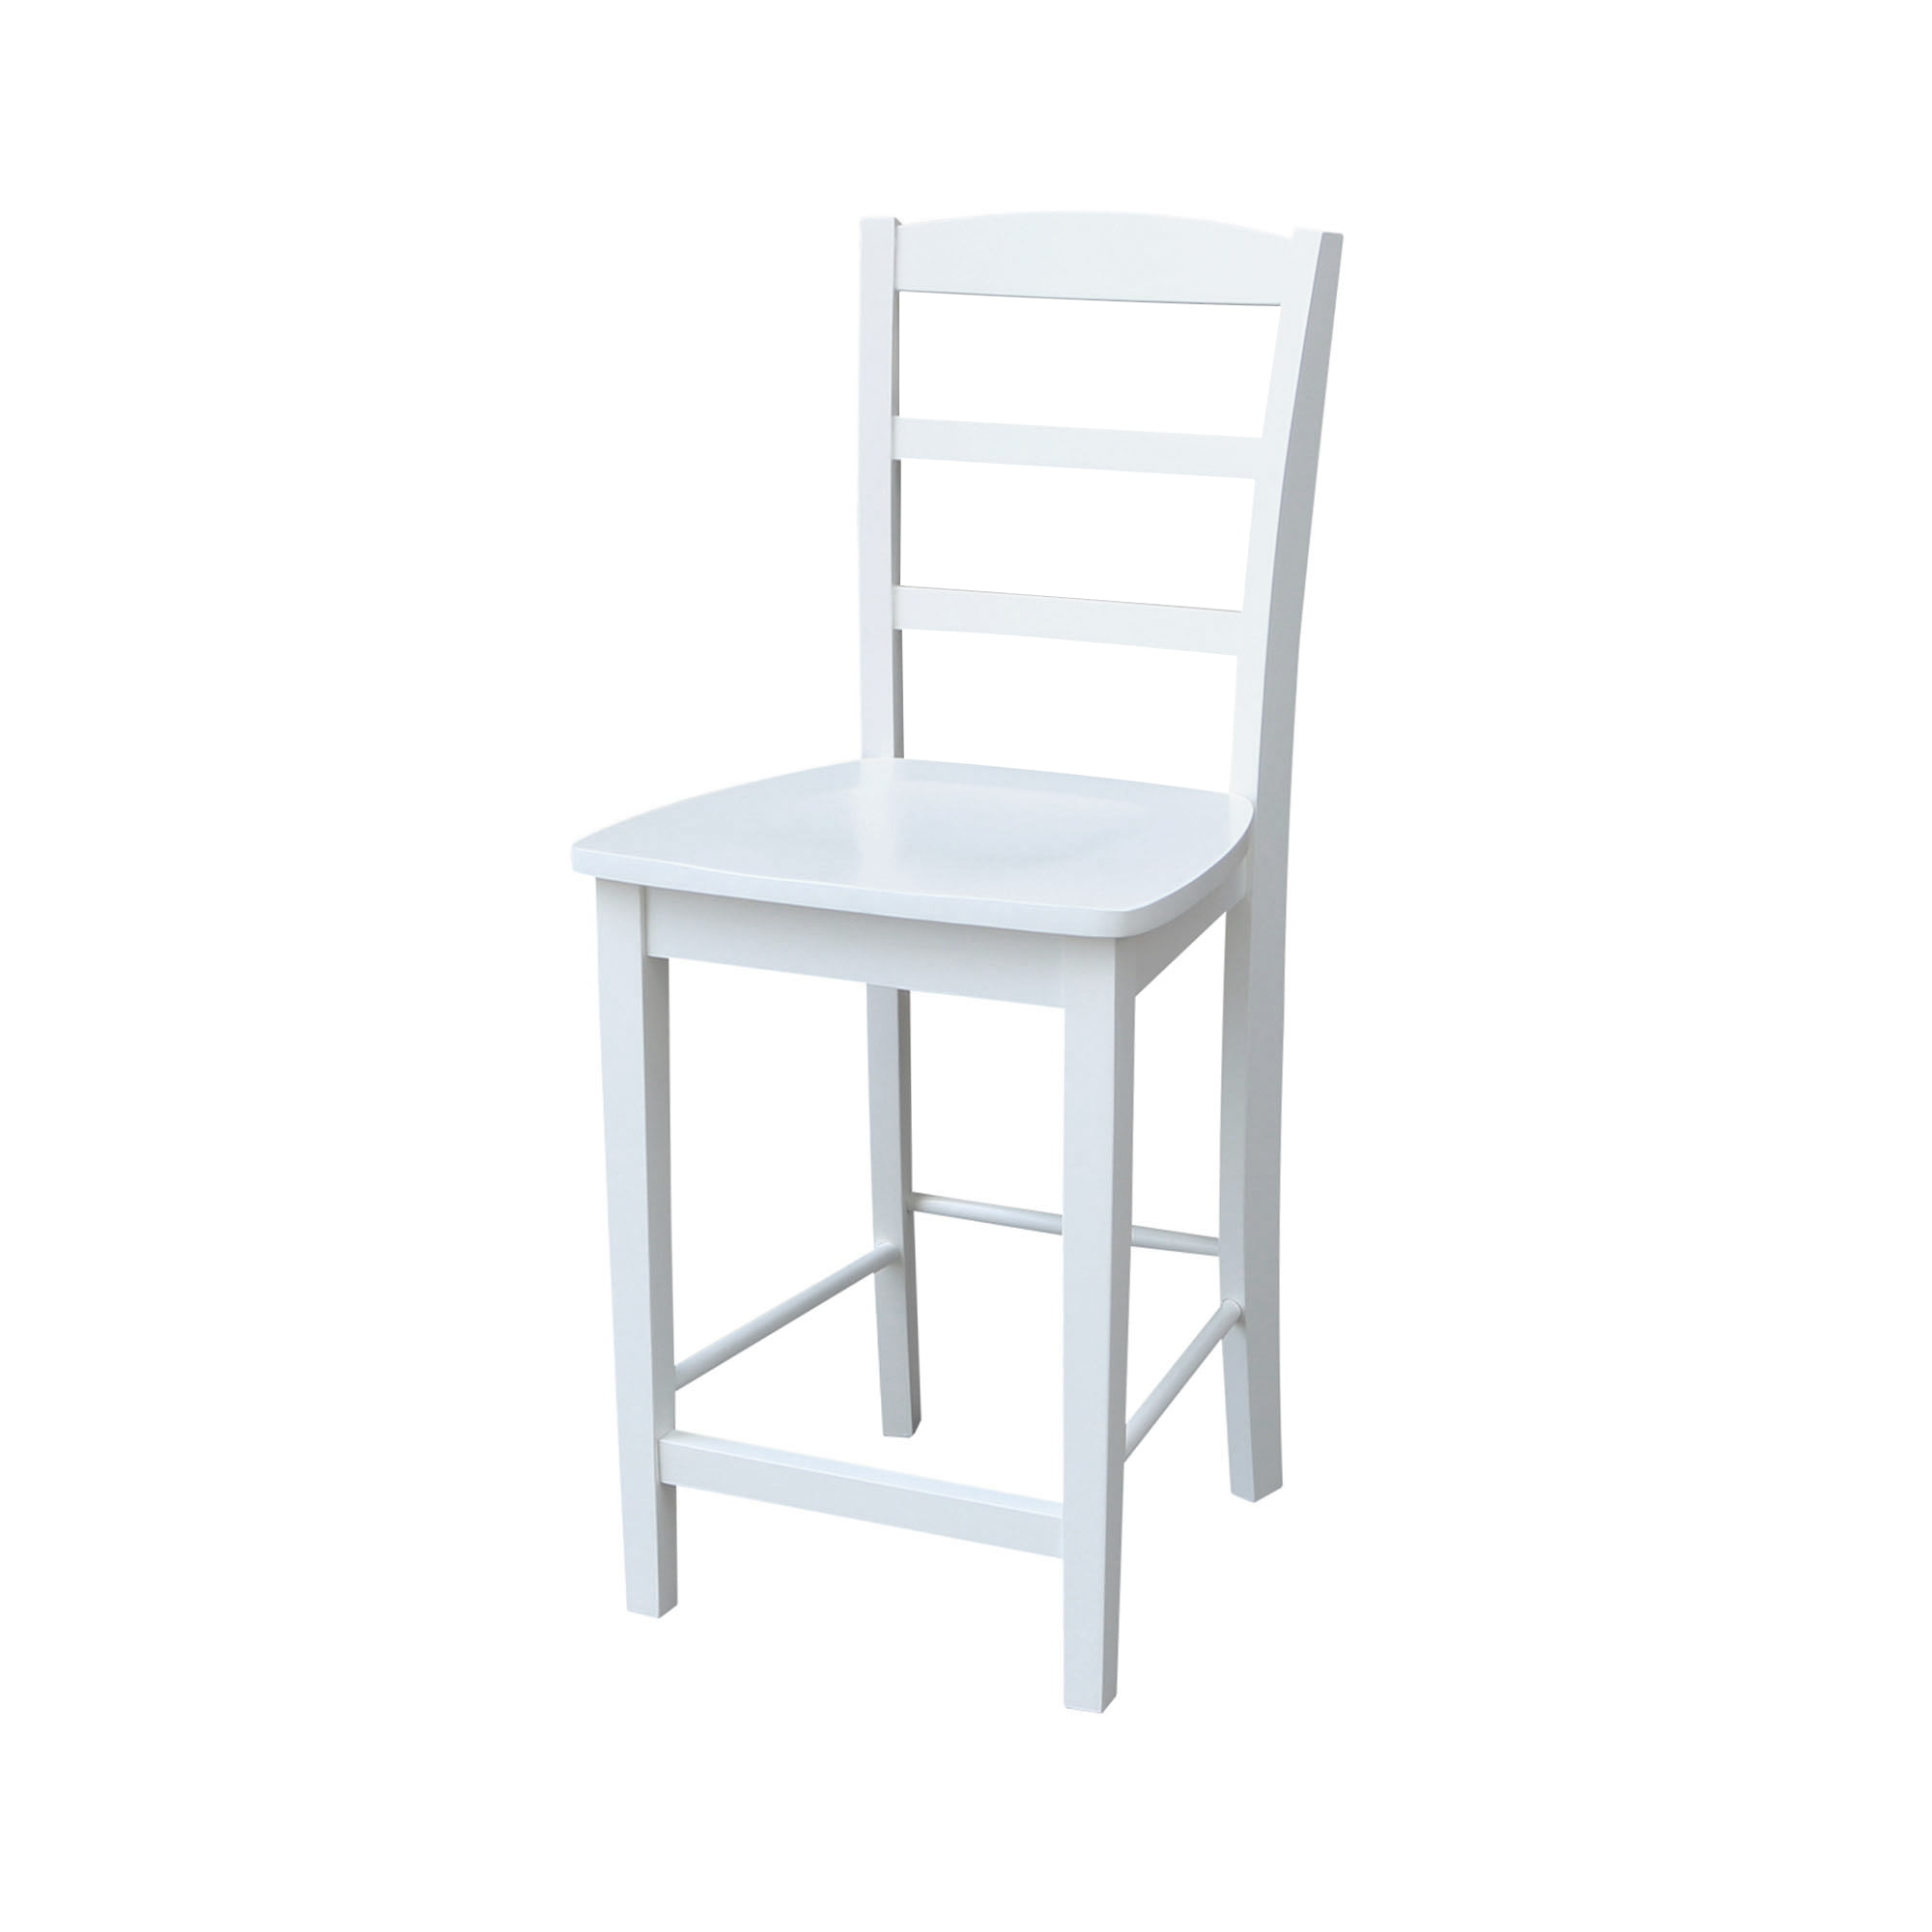 International Concepts Wood Madrid Ladder Back Counter Height Stool in White - 24" Seat Height Promo